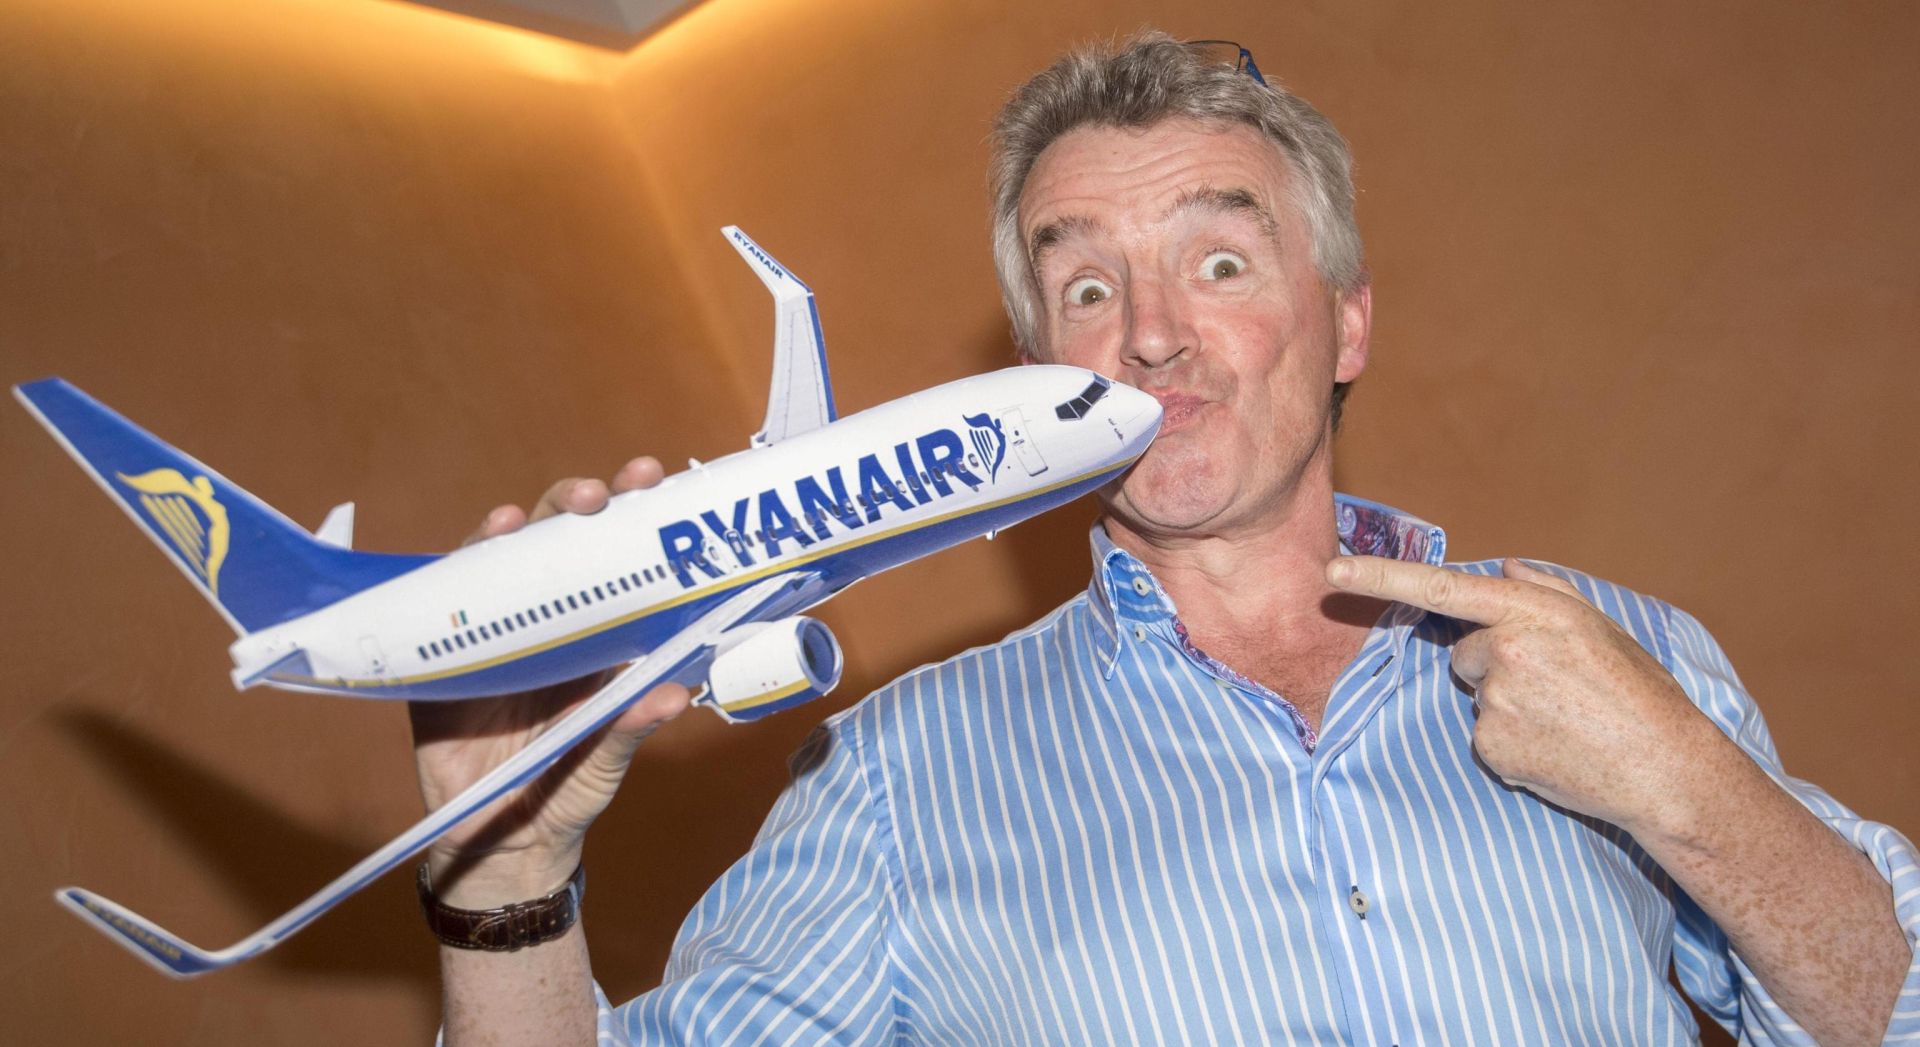 epa06052708 Ryanair's CEO, Michael O'Leary, poses for photographers prior to the start of a press conference in Rome, Italy, 27 June 2017. Michael O'Leary said 'We are pleased to announce record bookings on our Italy summer 2017 schedule as even more customers travel to/from our 26 Italian airports on the lowest fares, with over 400 routes to choose from. Our Italian traffic will grow by over 12 per cent this year from 32m to 36m customers. We are pleased to roll out our latest customer improvements under Year 4 of our 'Always Getting Better' programme, including connecting flights through Rome Fiumicino and Milan Bergamo, long haul Air Europa flights on sale on the Ryanair.com website, a new partnership with the Erasmus Student Network and an enhanced Ryanair Rooms website  with much more to come.  EPA/CLAUDIO PERI